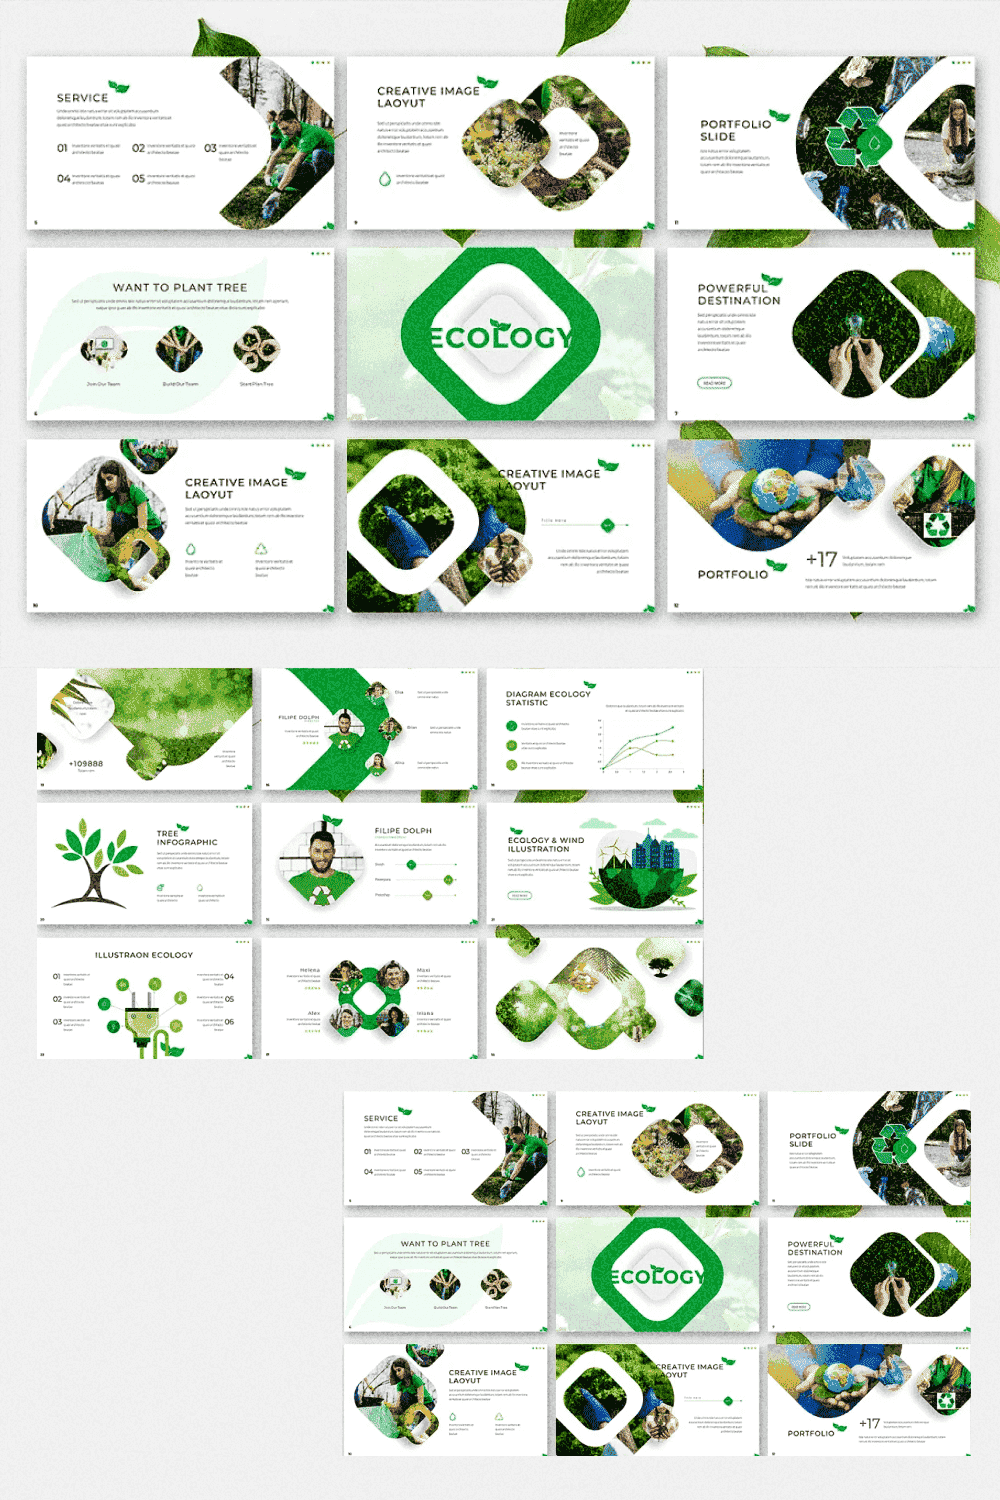 Ecology - Powerpoint Template - "Want To Plant Tree".